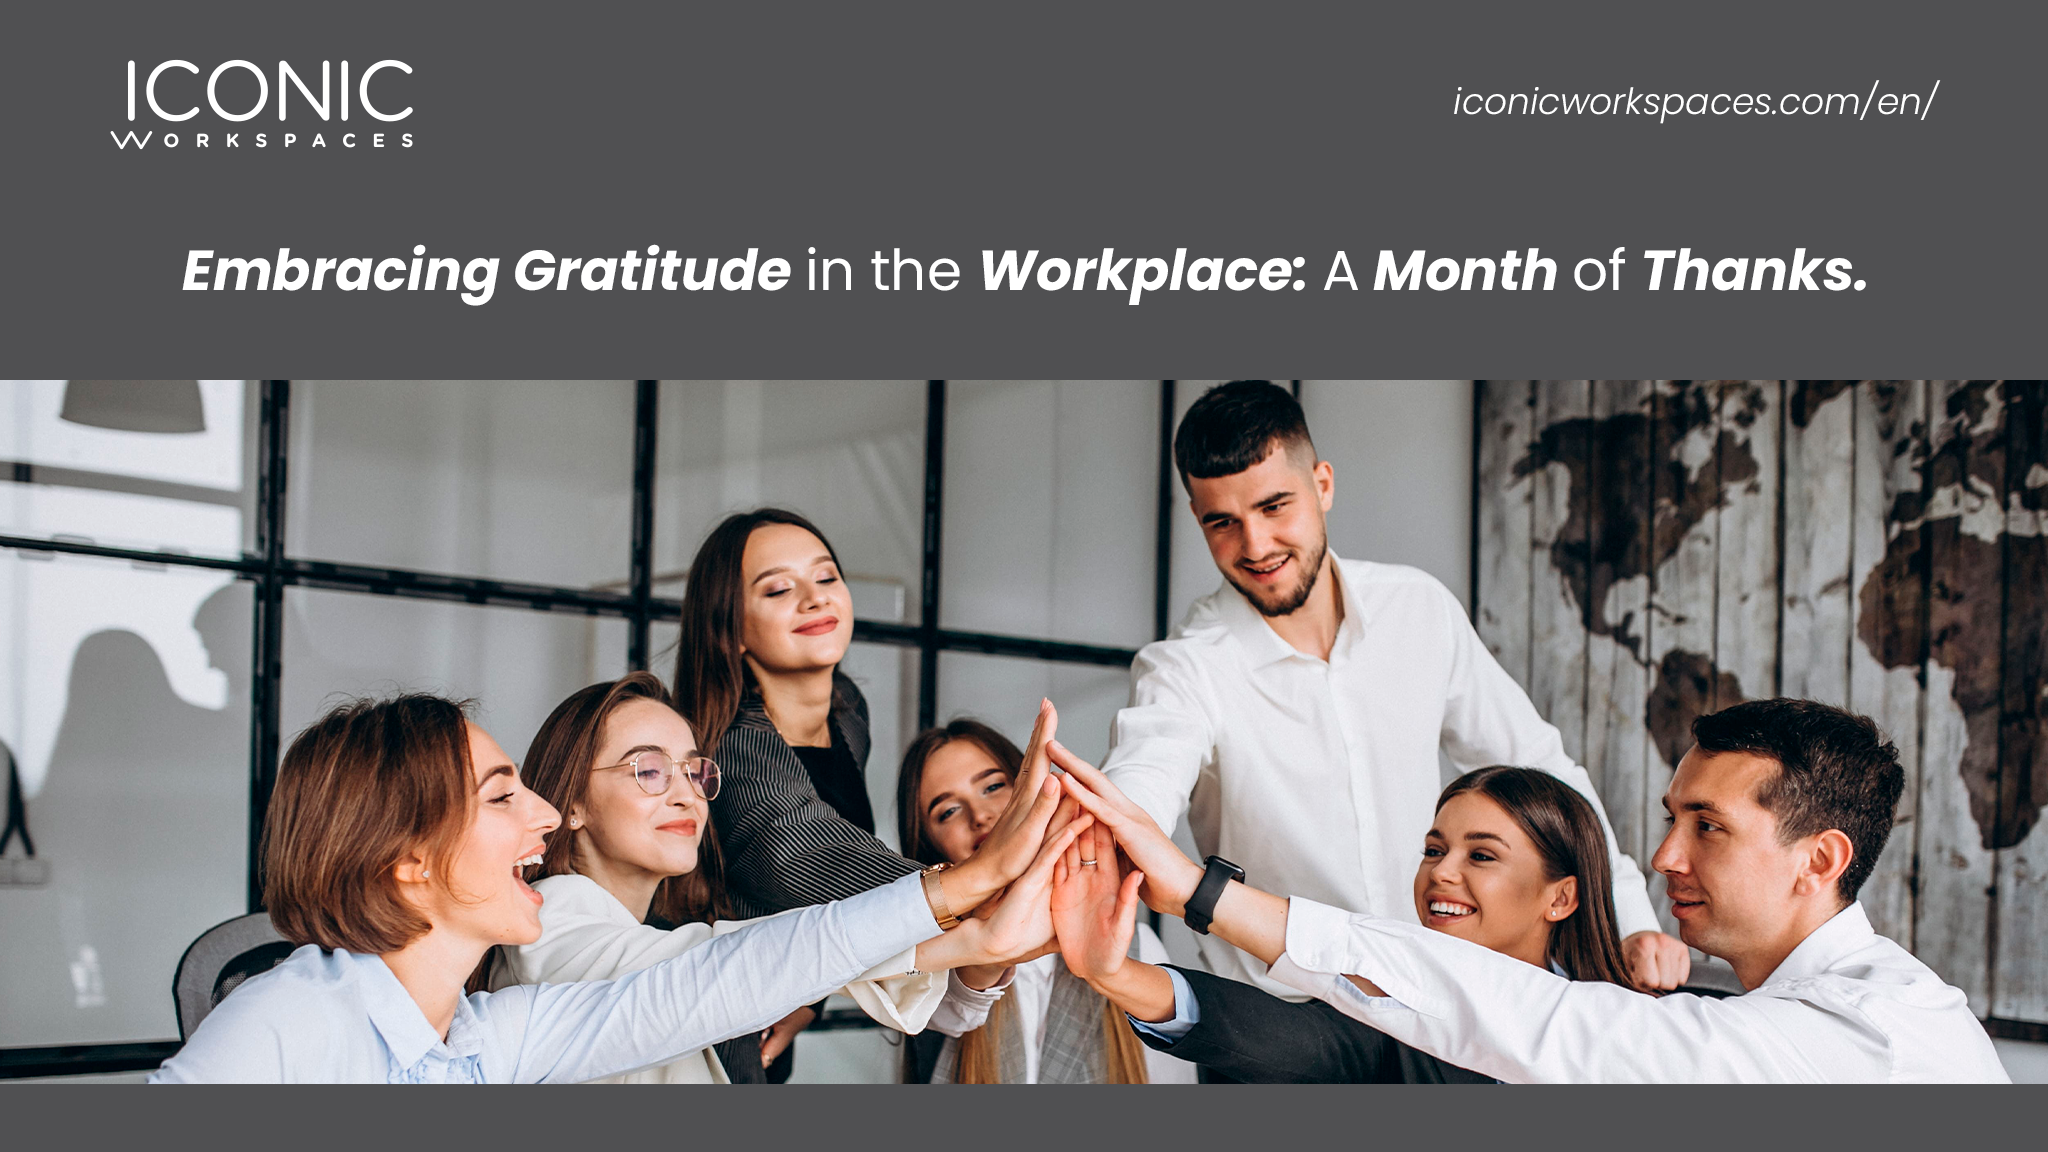 Embracing Gratitude in the Workplace: A Month of Thanks